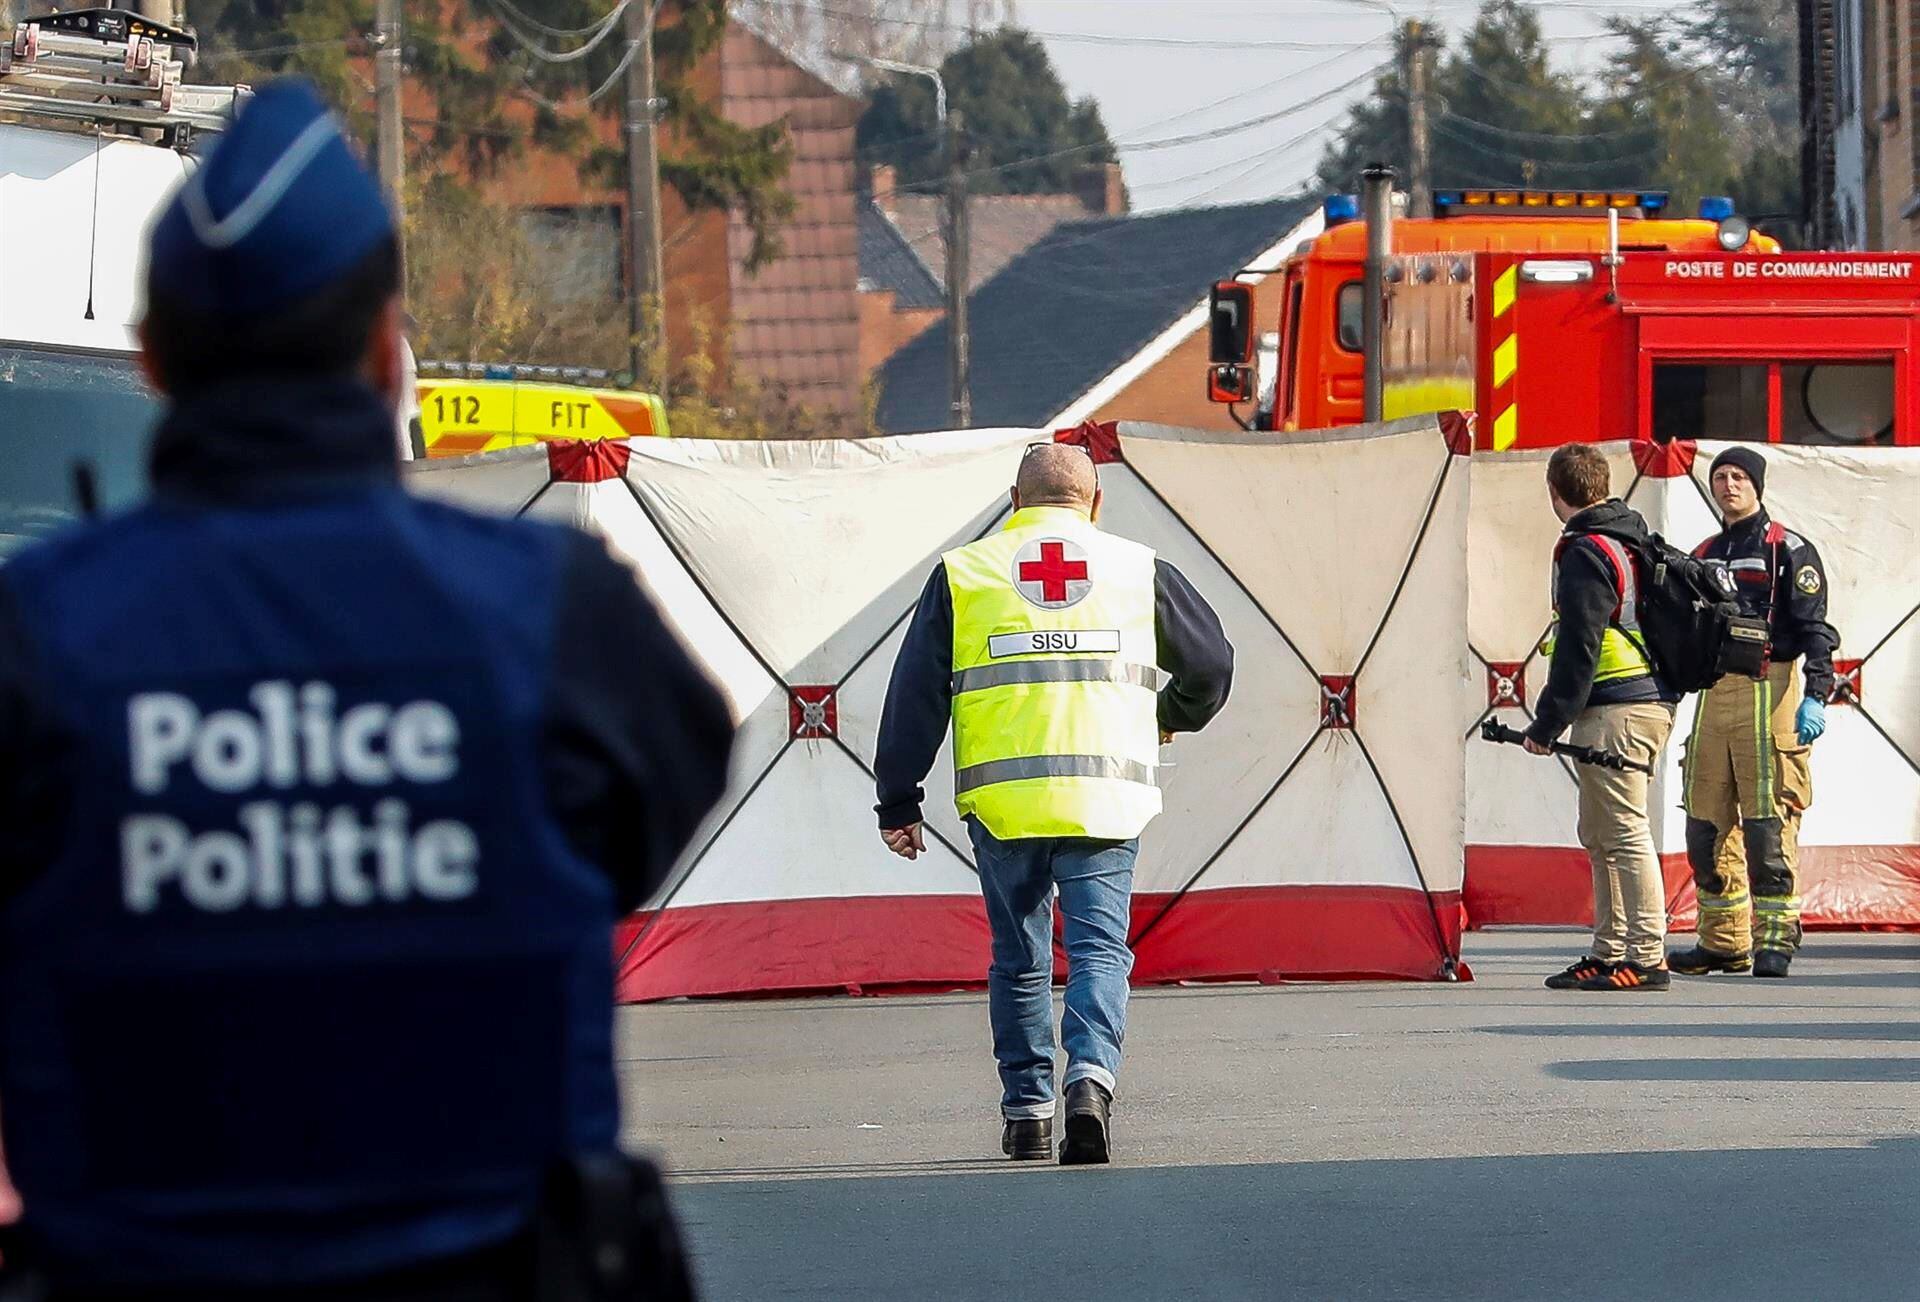 A police officer stands guard at the cordoned off scene in Strepy Bracquegnies, Belgium.  (EFE/EPA/JULIEN WARNAND).